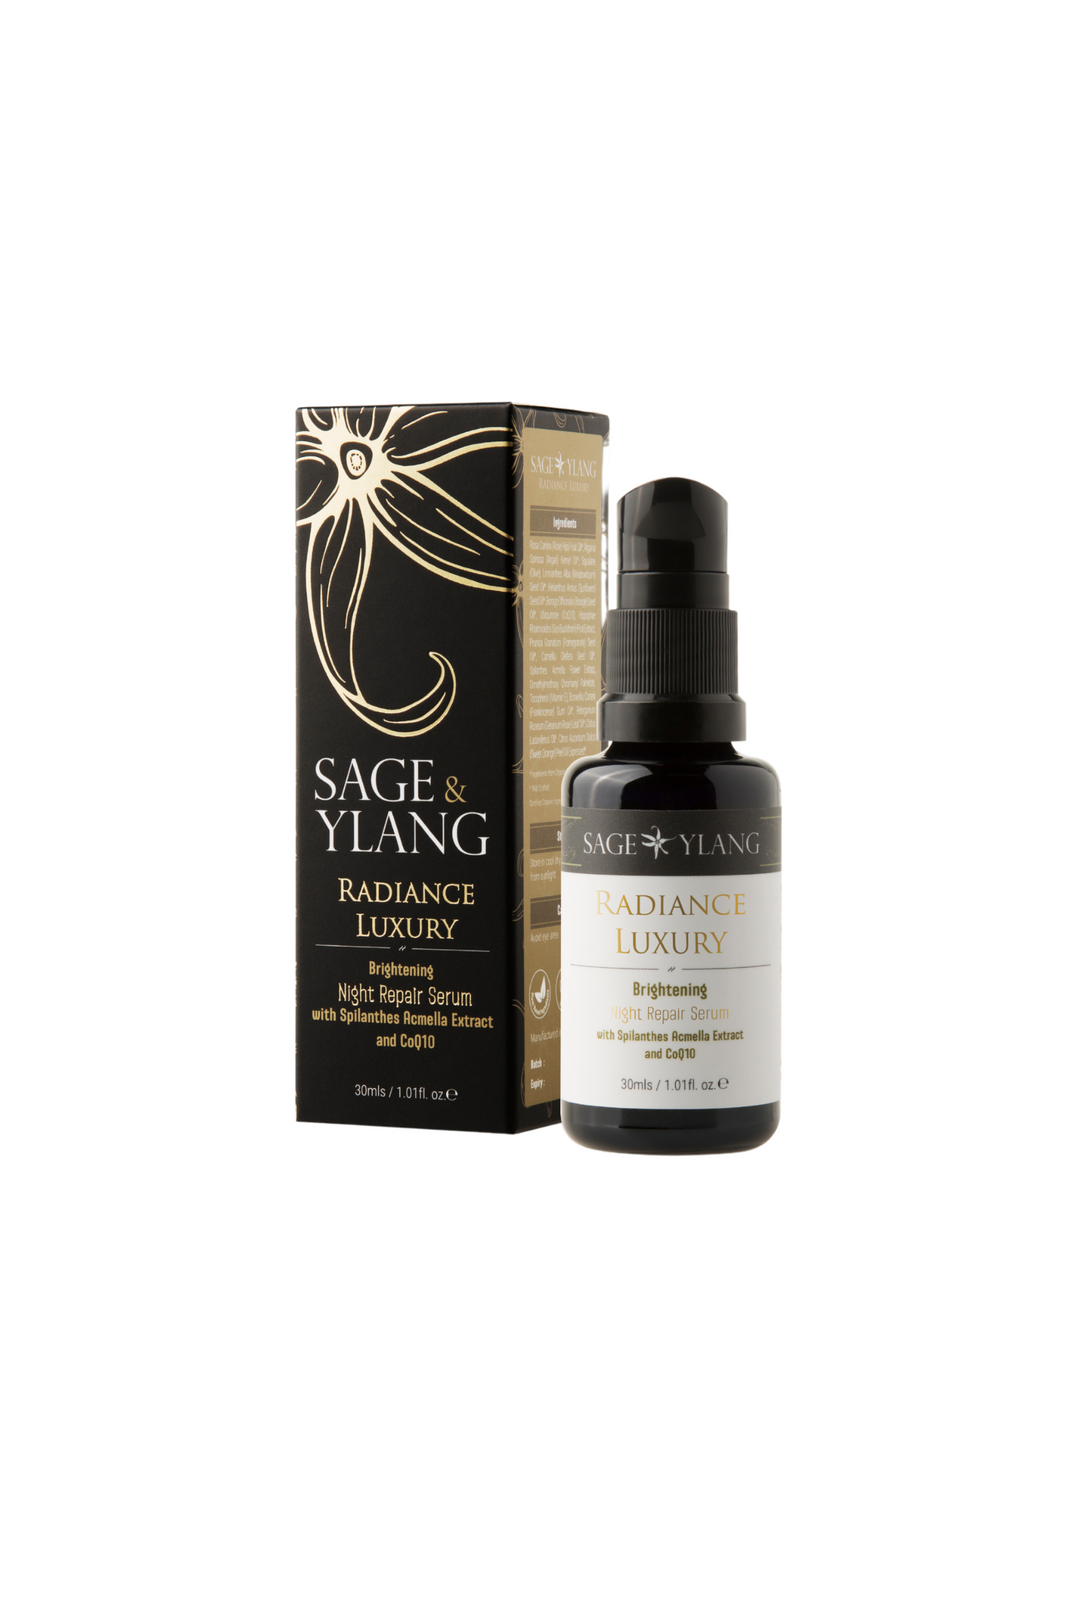 Sage & Ylang Radiance Luxury, available on ZERRIN with free Singapore shipping